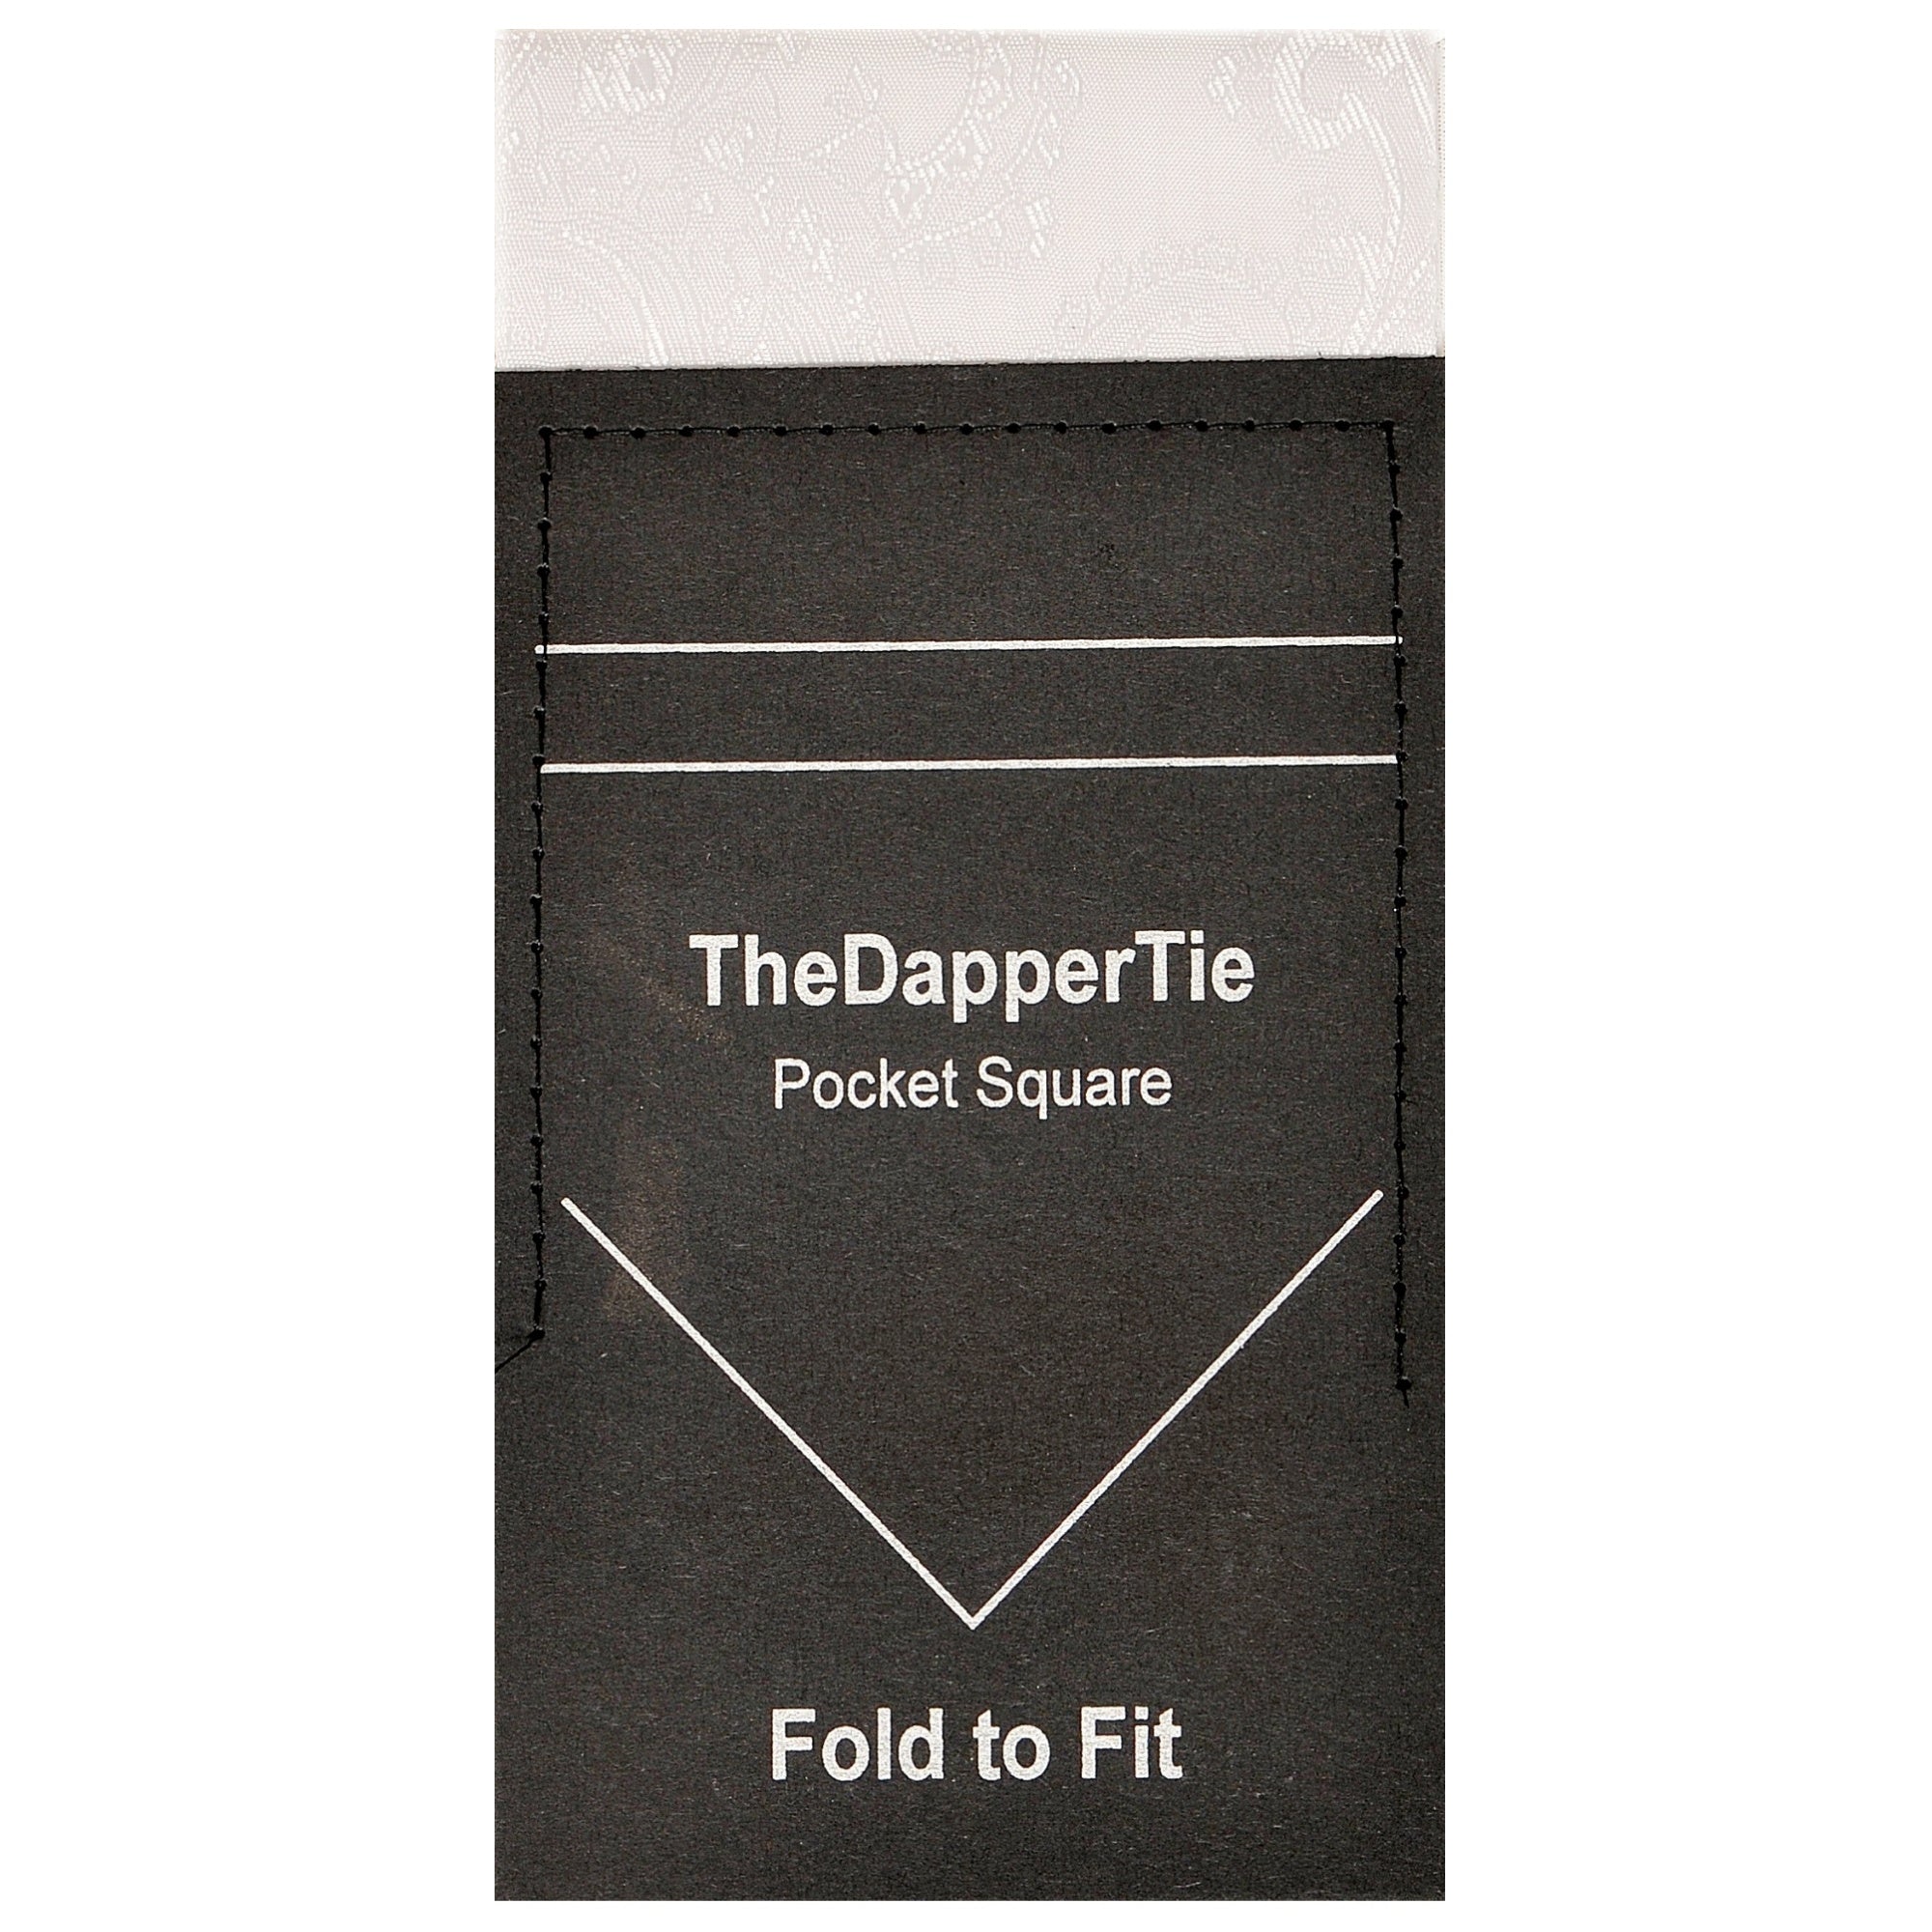 TheDapperTie - New Men's Paisley Flat Pre Folded Pocket Square on Card Prefolded Pocket Squares TheDapperTie Off White Regular 